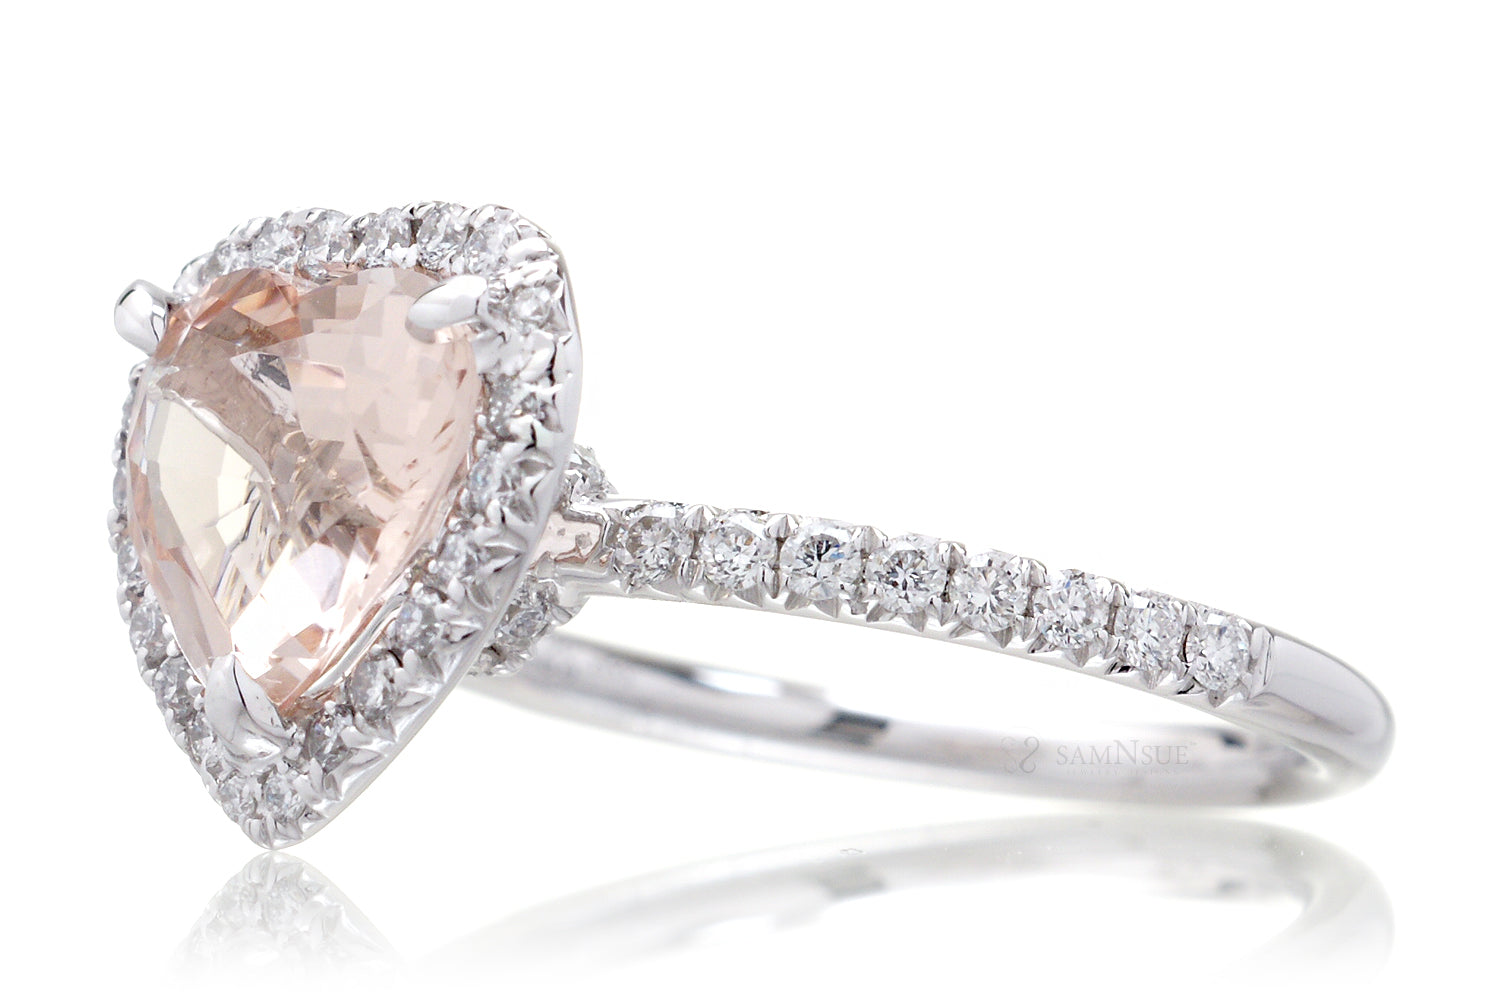 The Drenched Heart Morganite